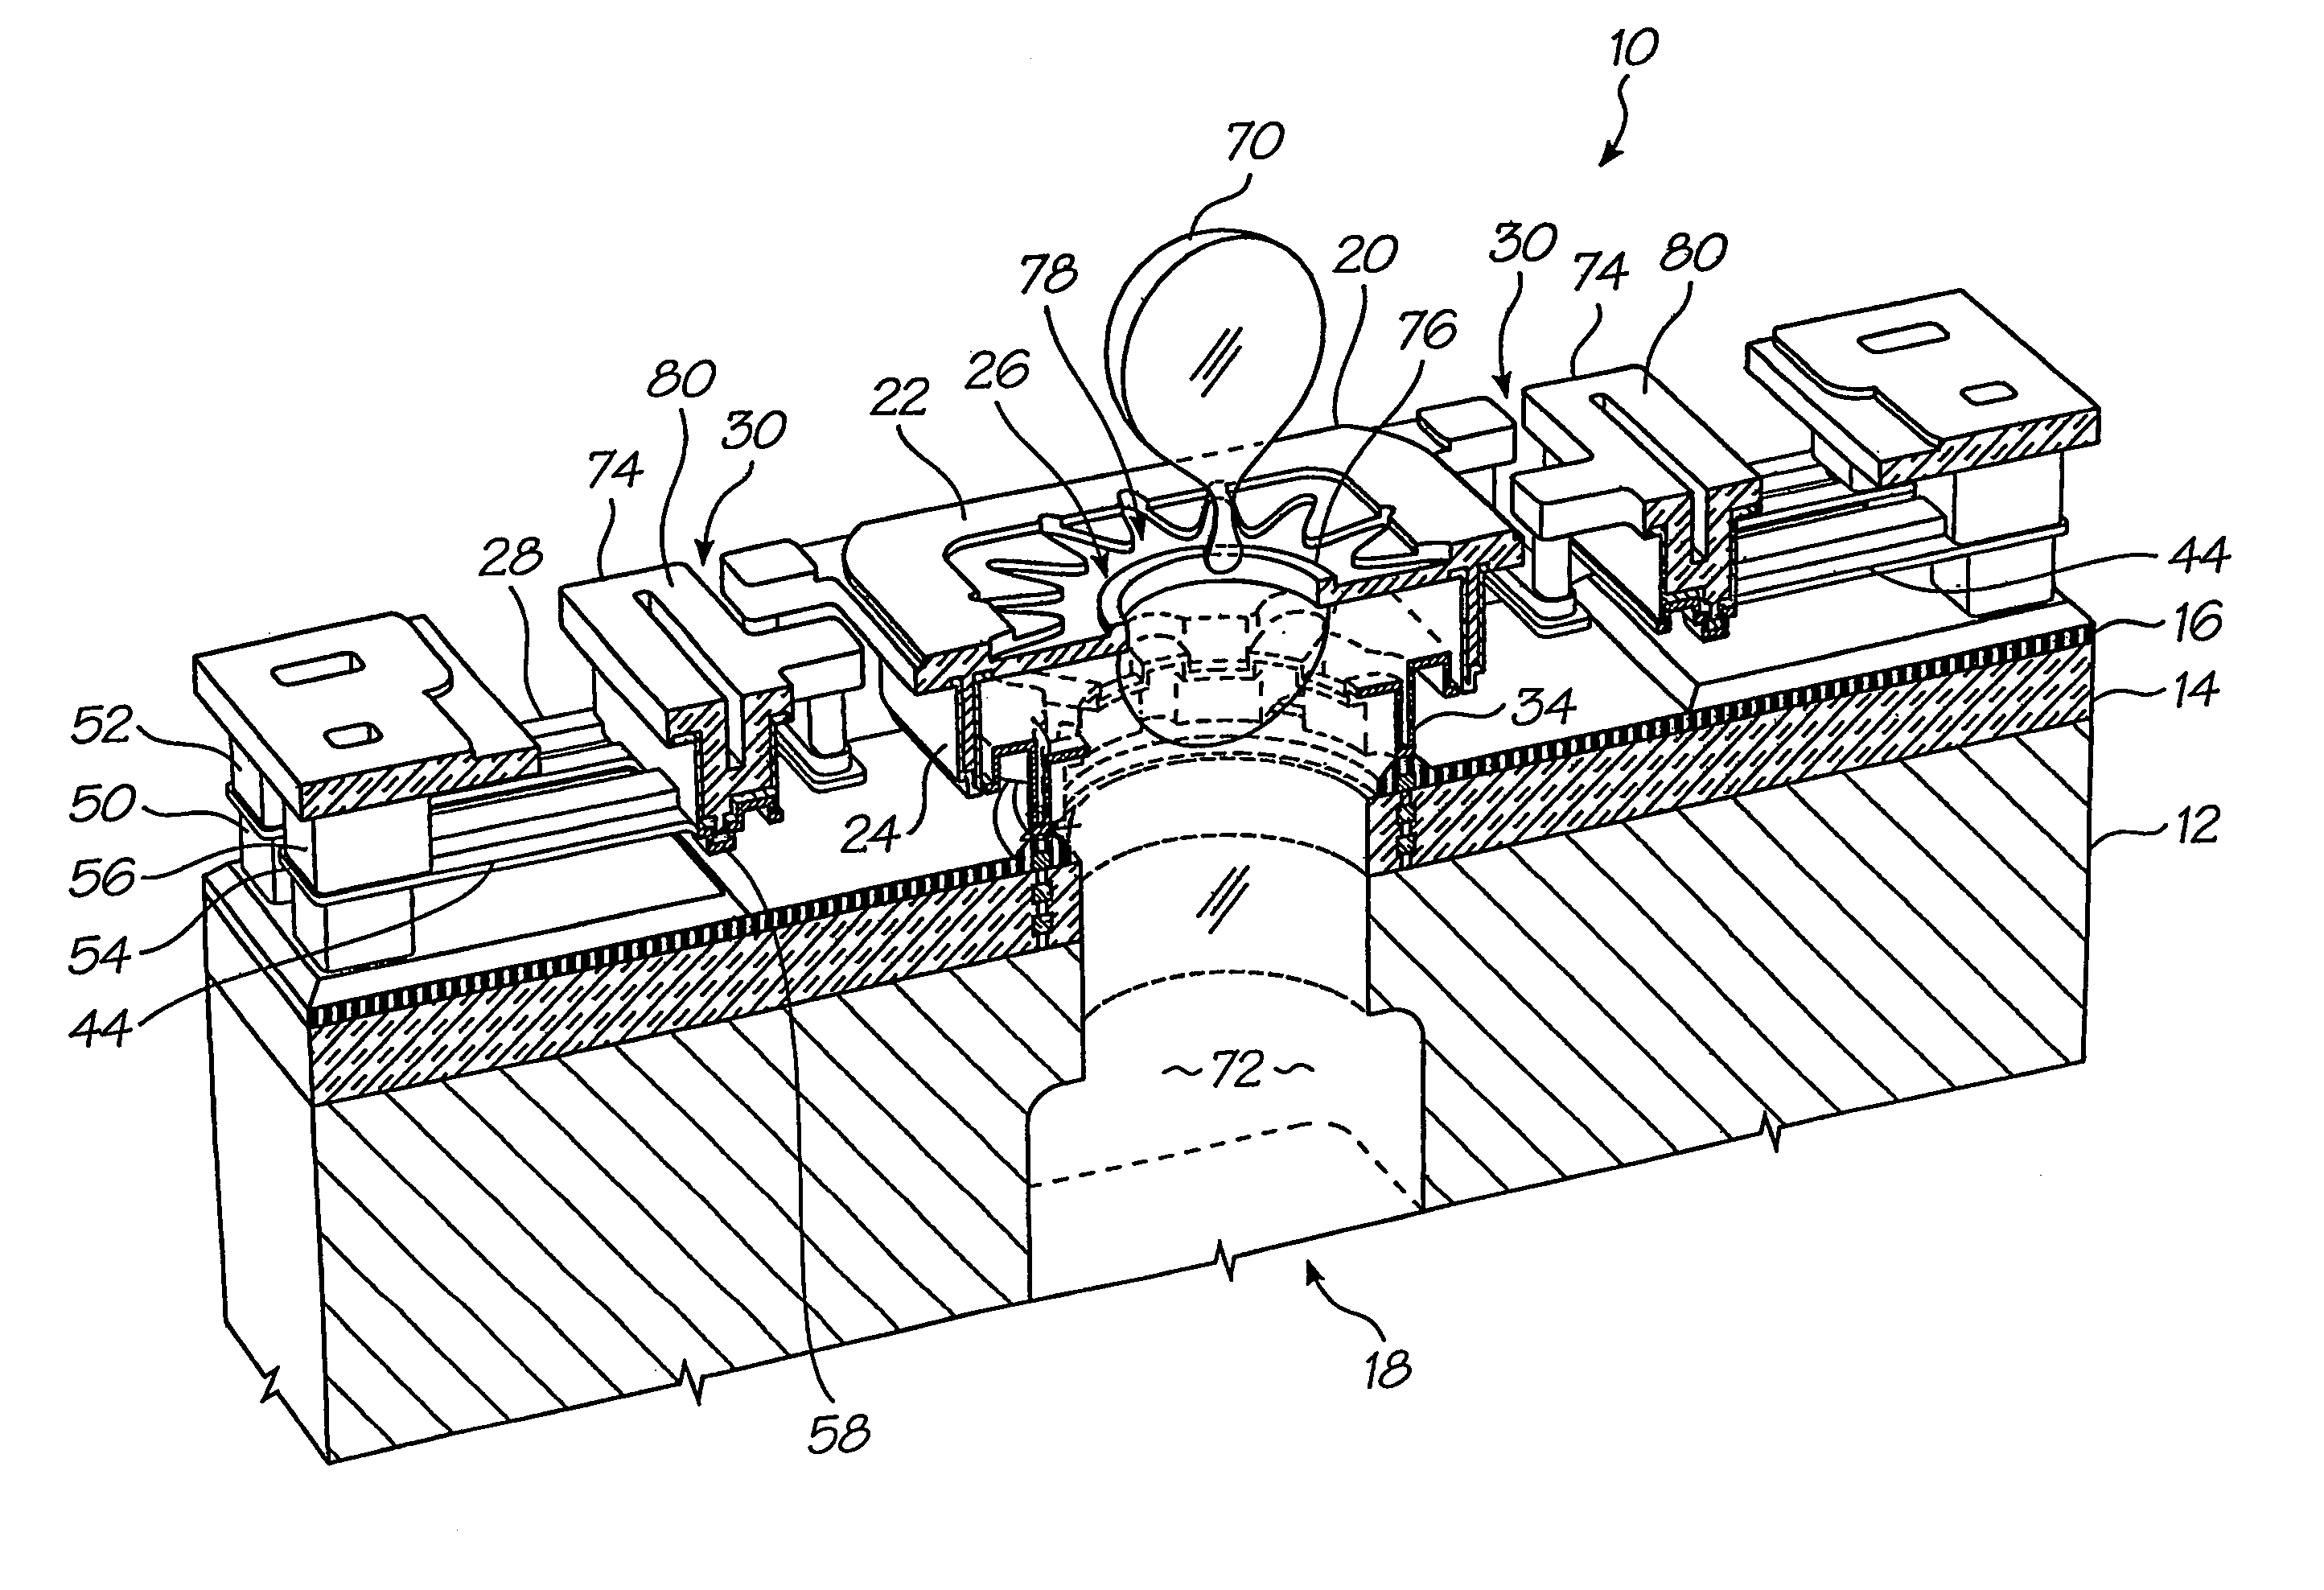 Symmetrically actuated ink ejection components for an ink jet printhead chip